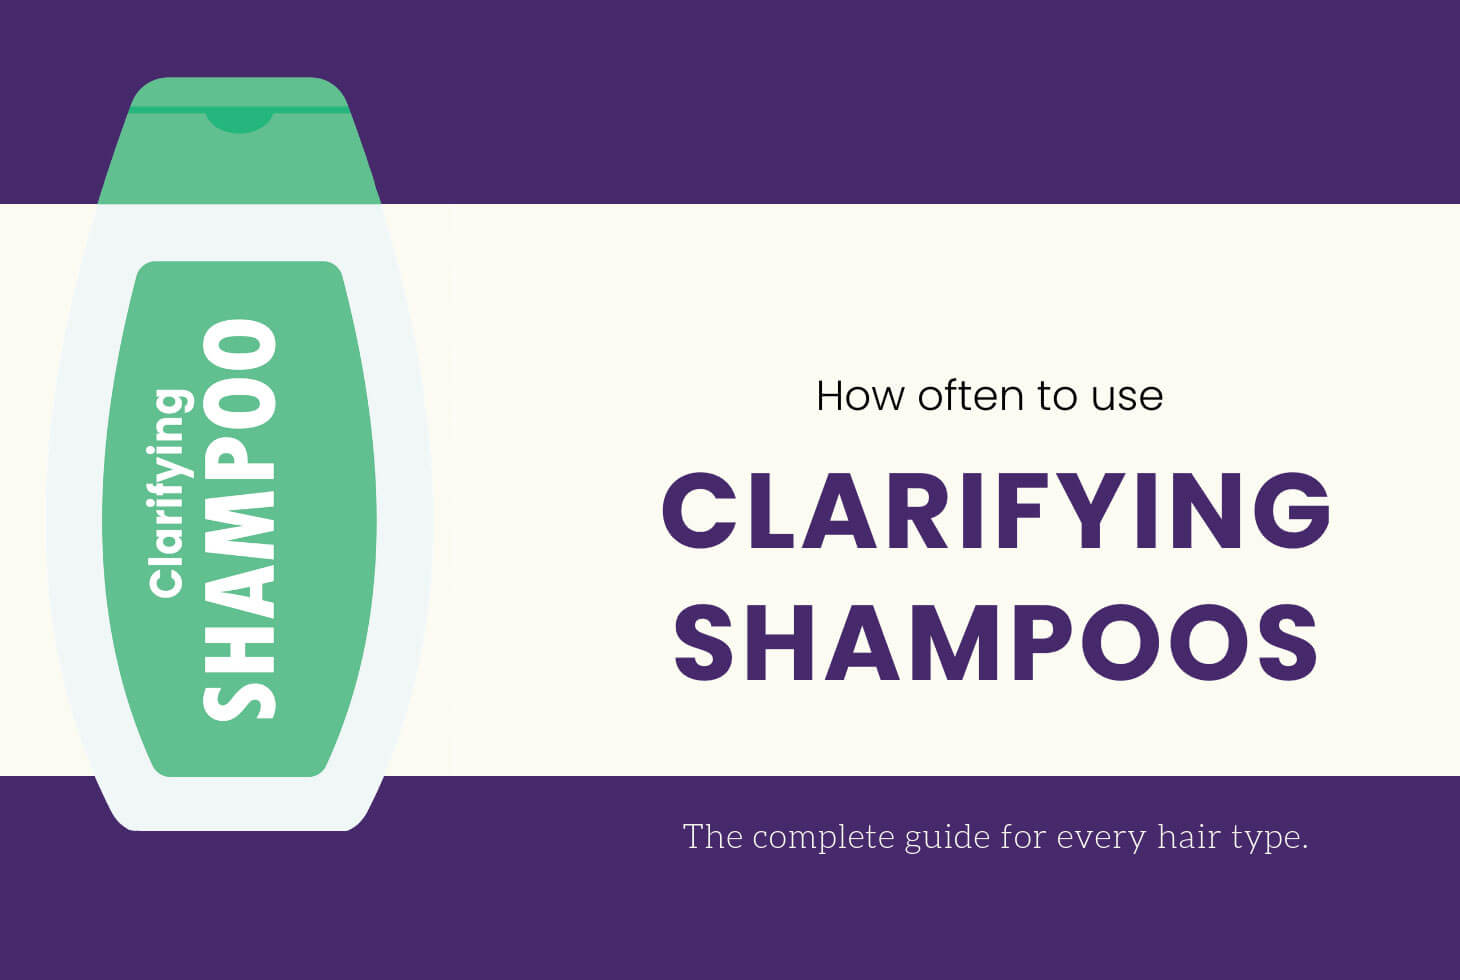 How Often to Use Clarifying Shampoo and Factors That Influence Frequency of Usage